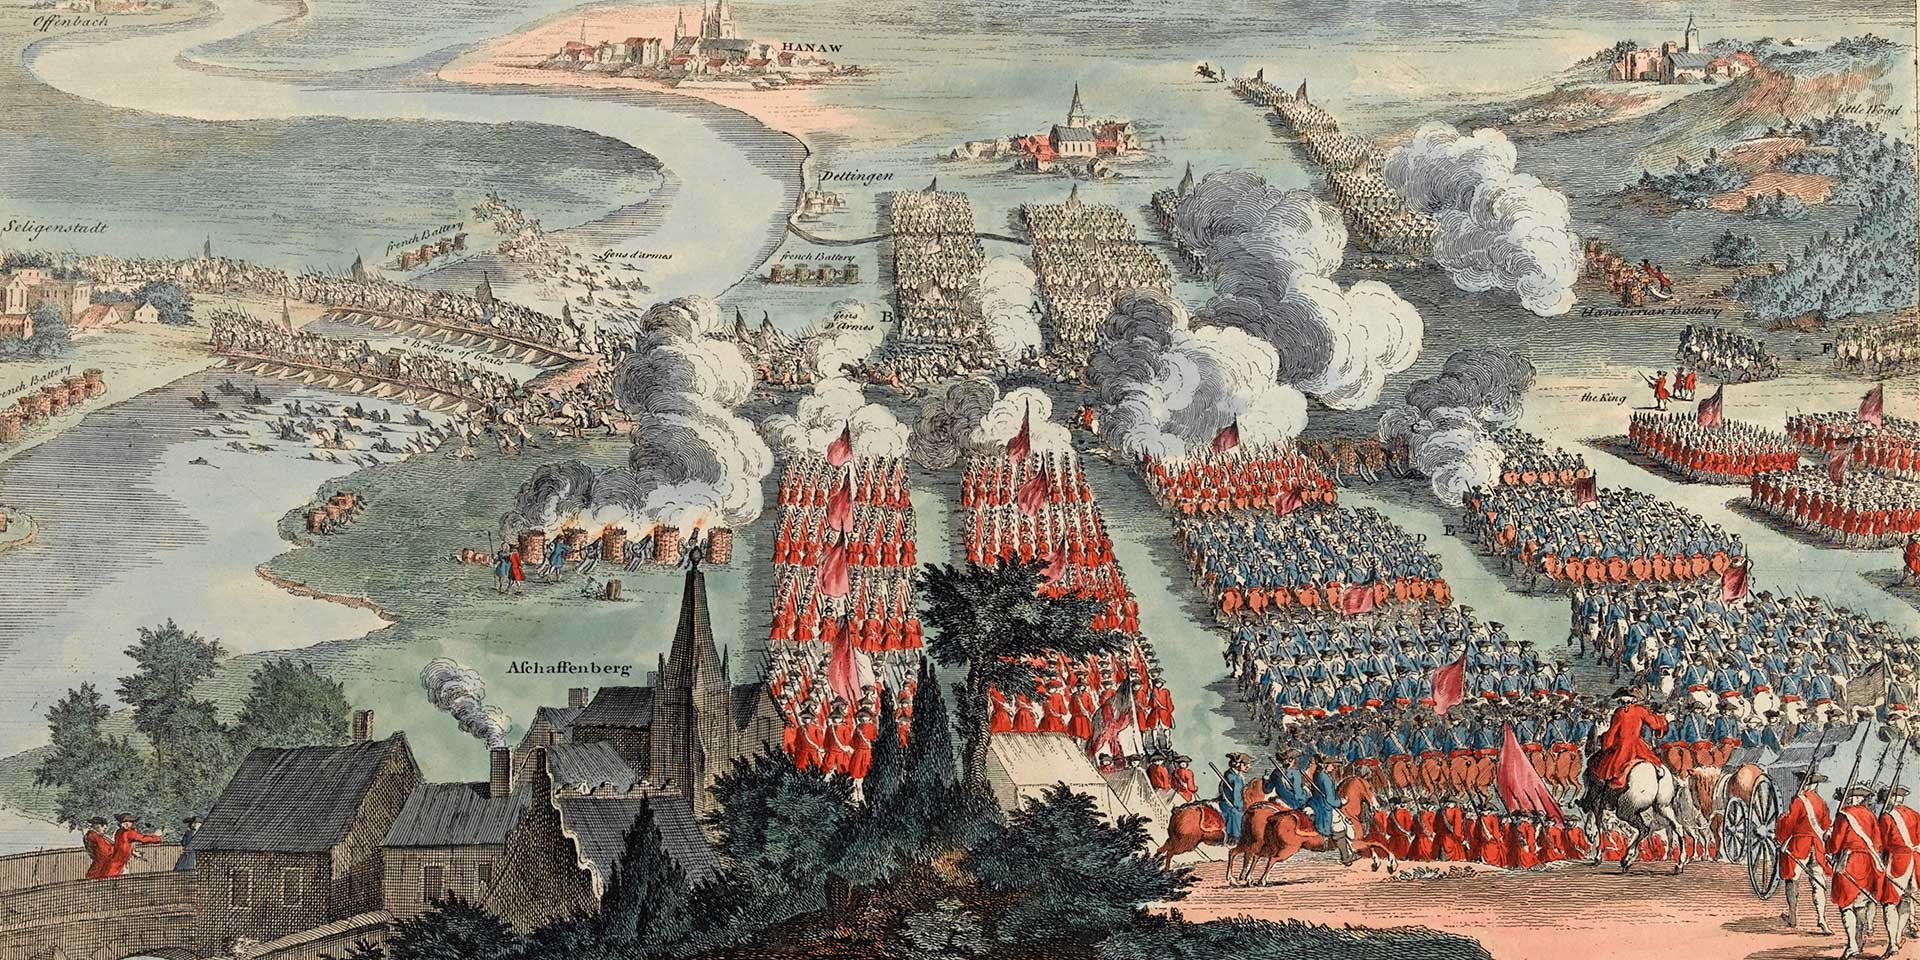 A view of the Glorious Action of Dettingen June 27